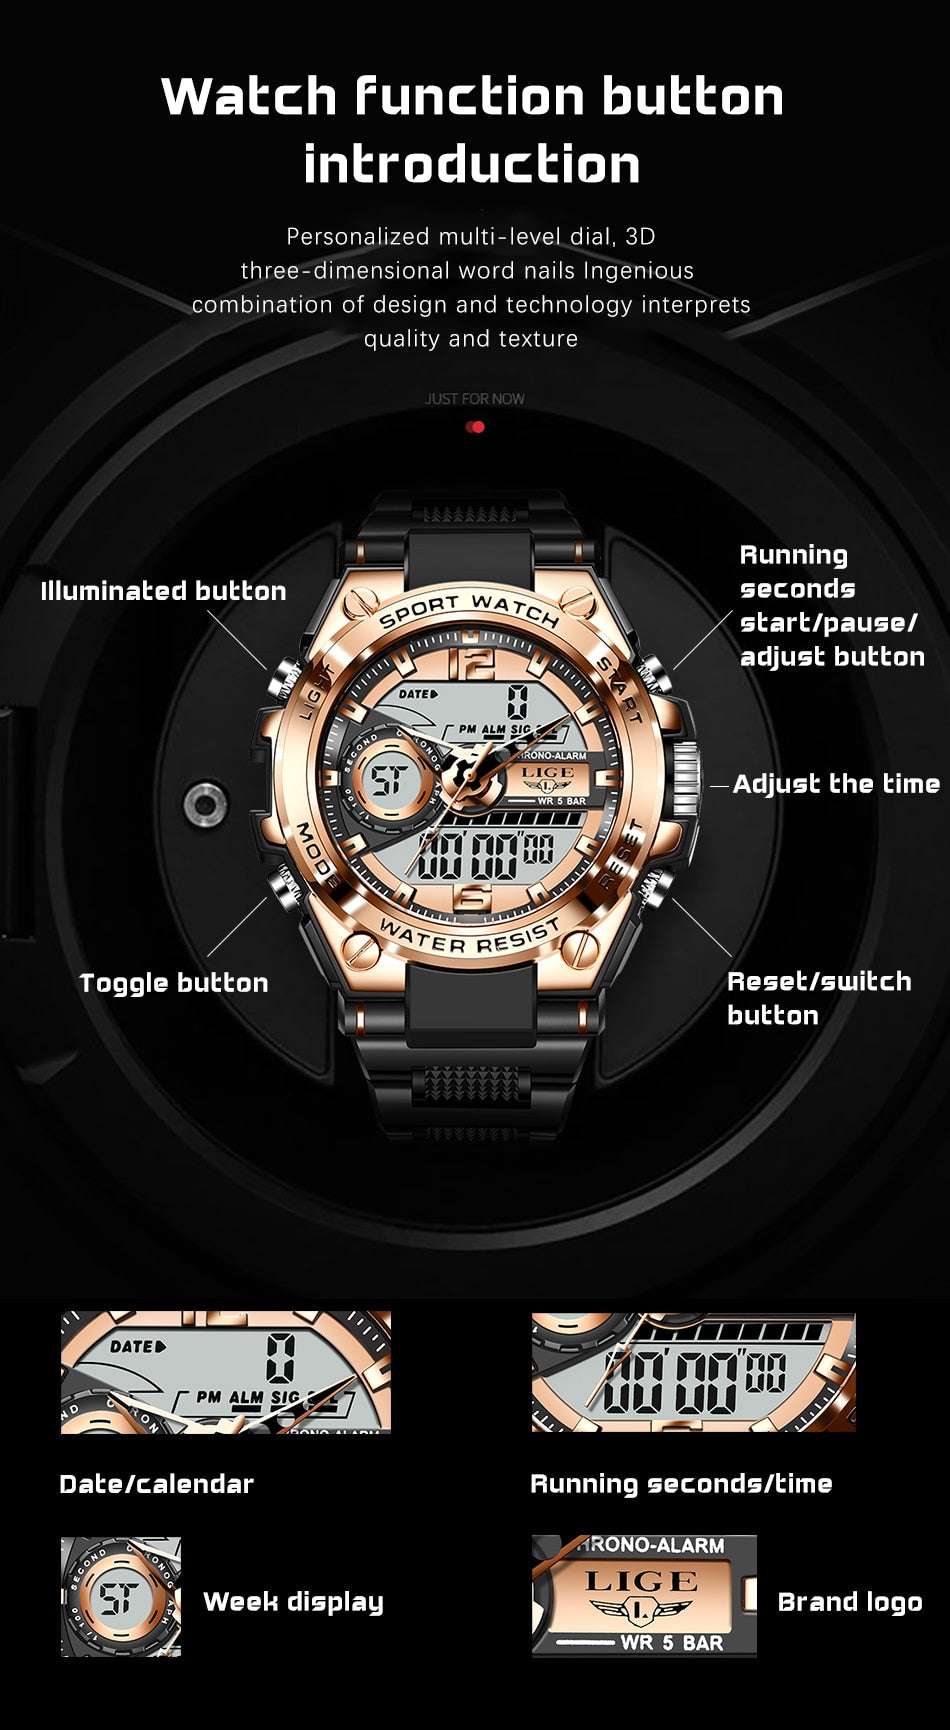 LIGE 8922 Watch, Military LED Watch, Rugged Elegant Watch, Waterproof Digital Watch - available at Sparq Mart